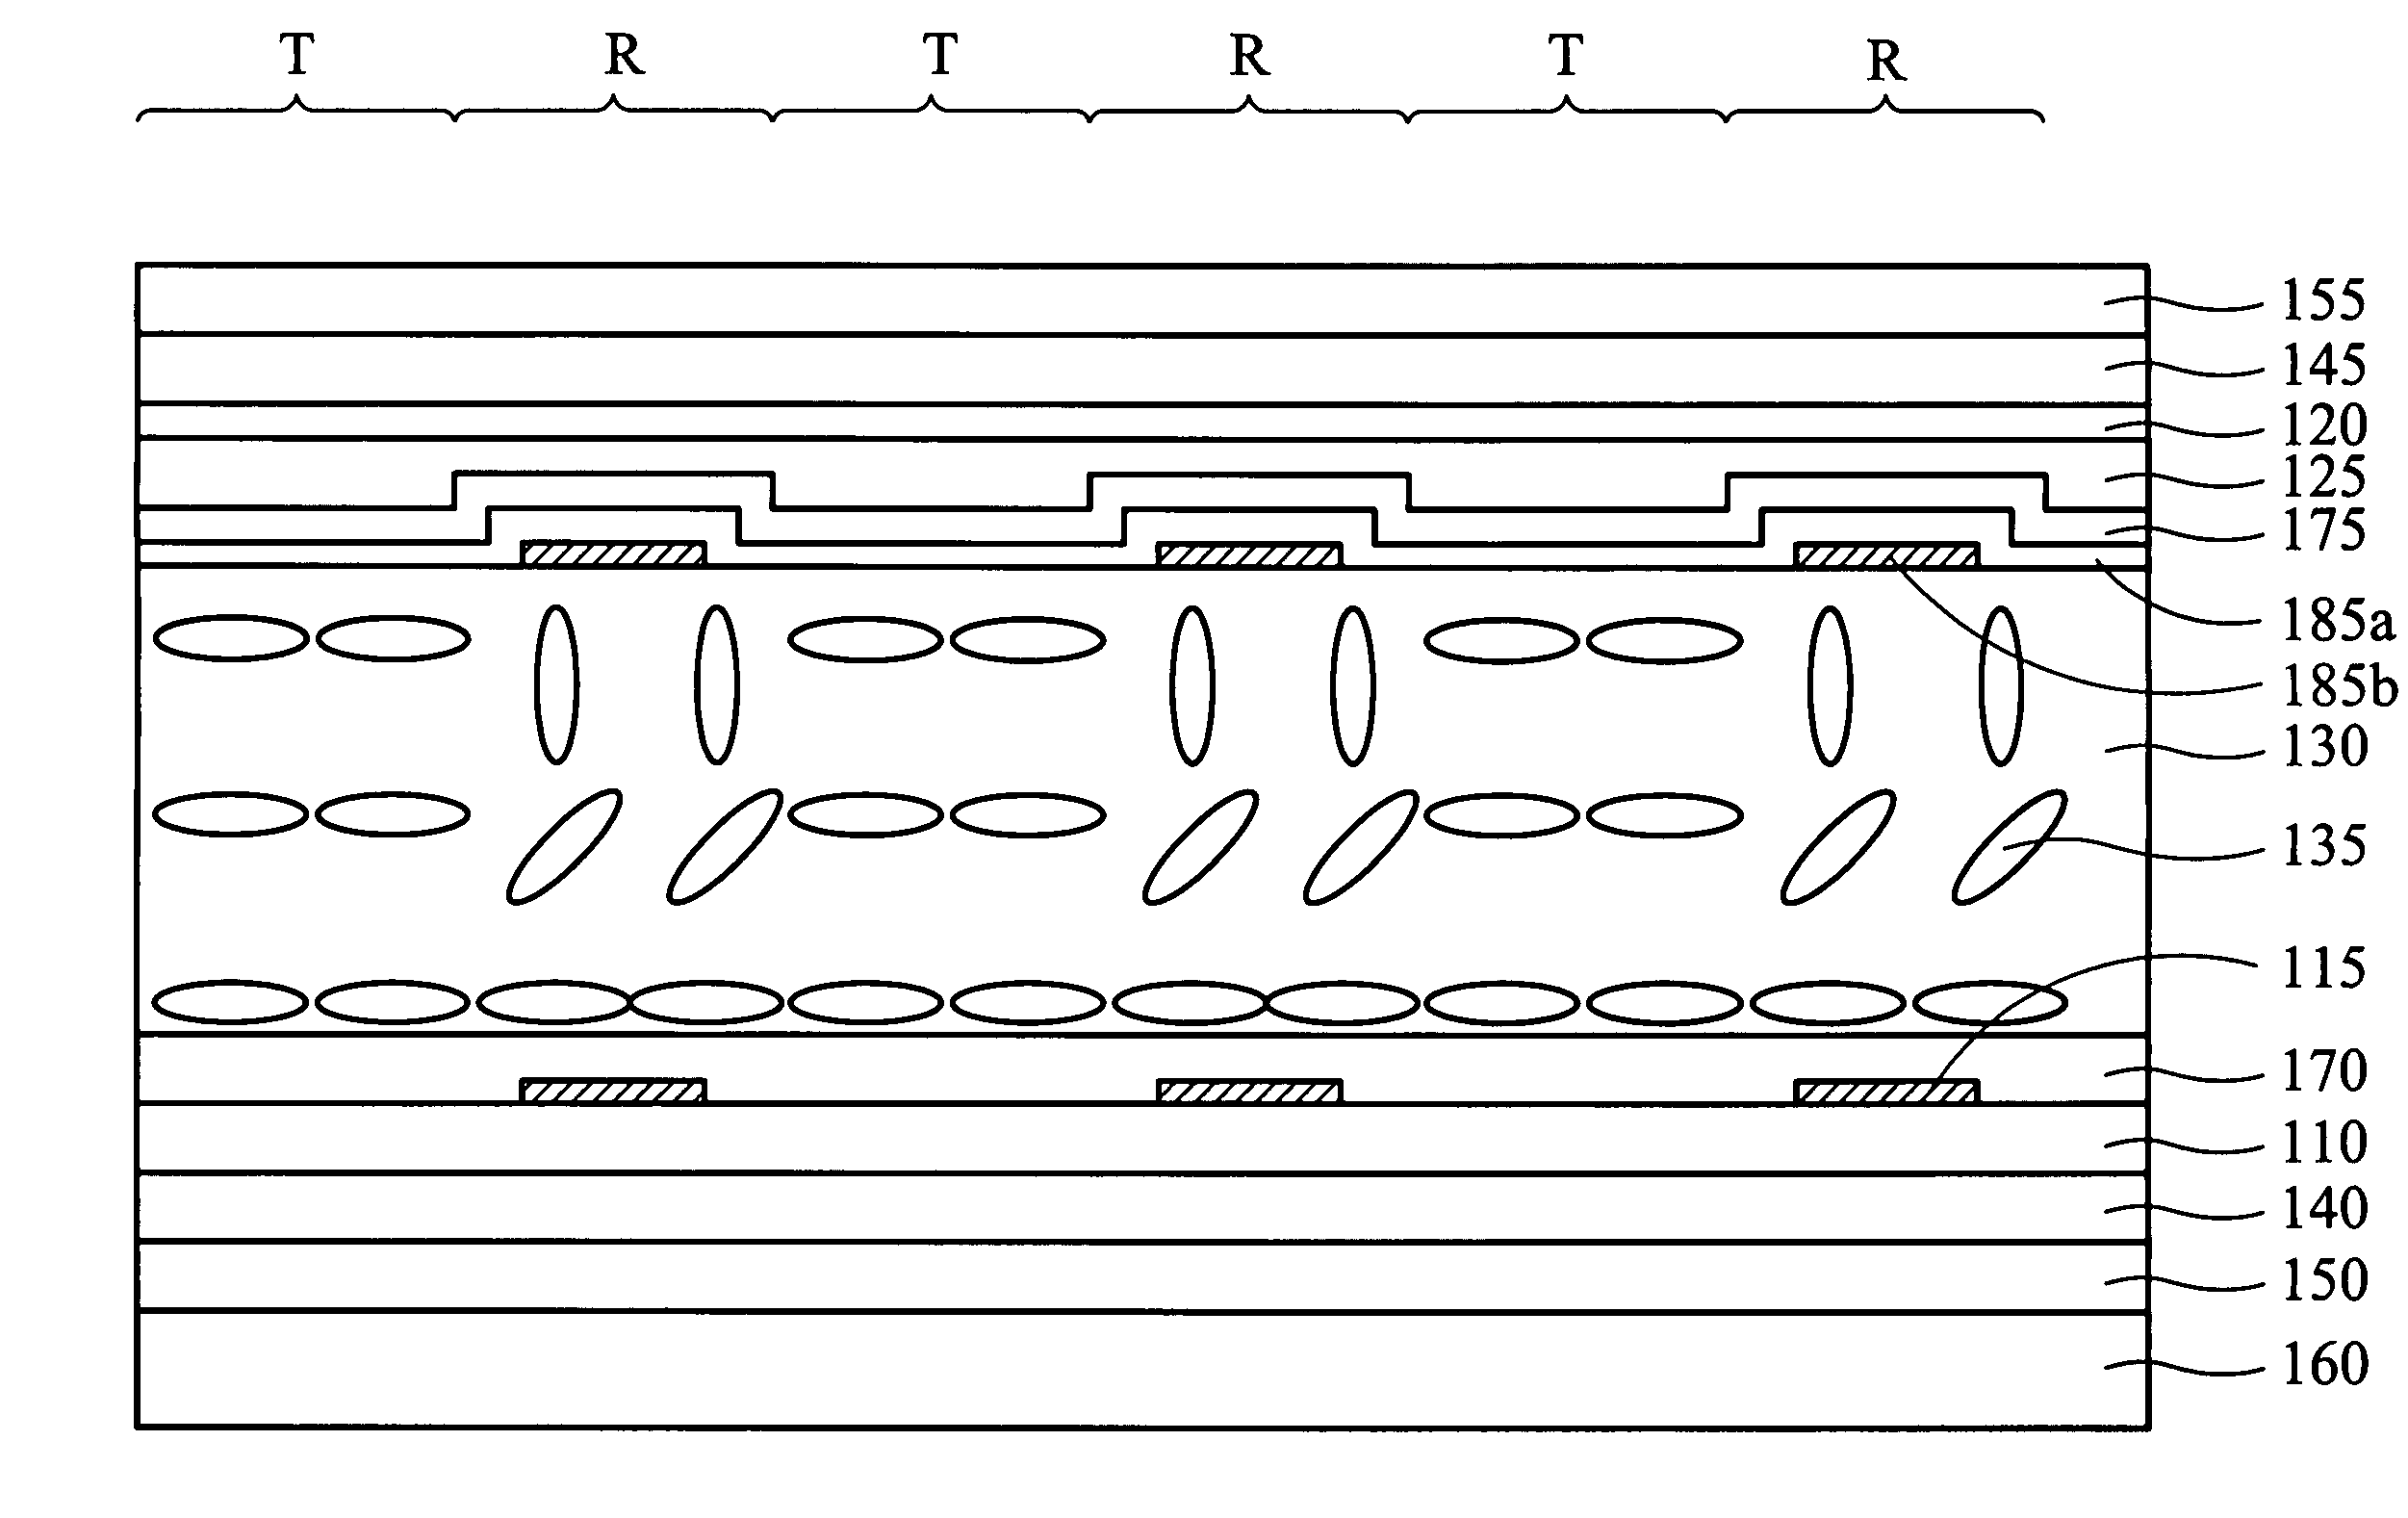 Transflective liquid crystal display devices and fabrication methods thereof